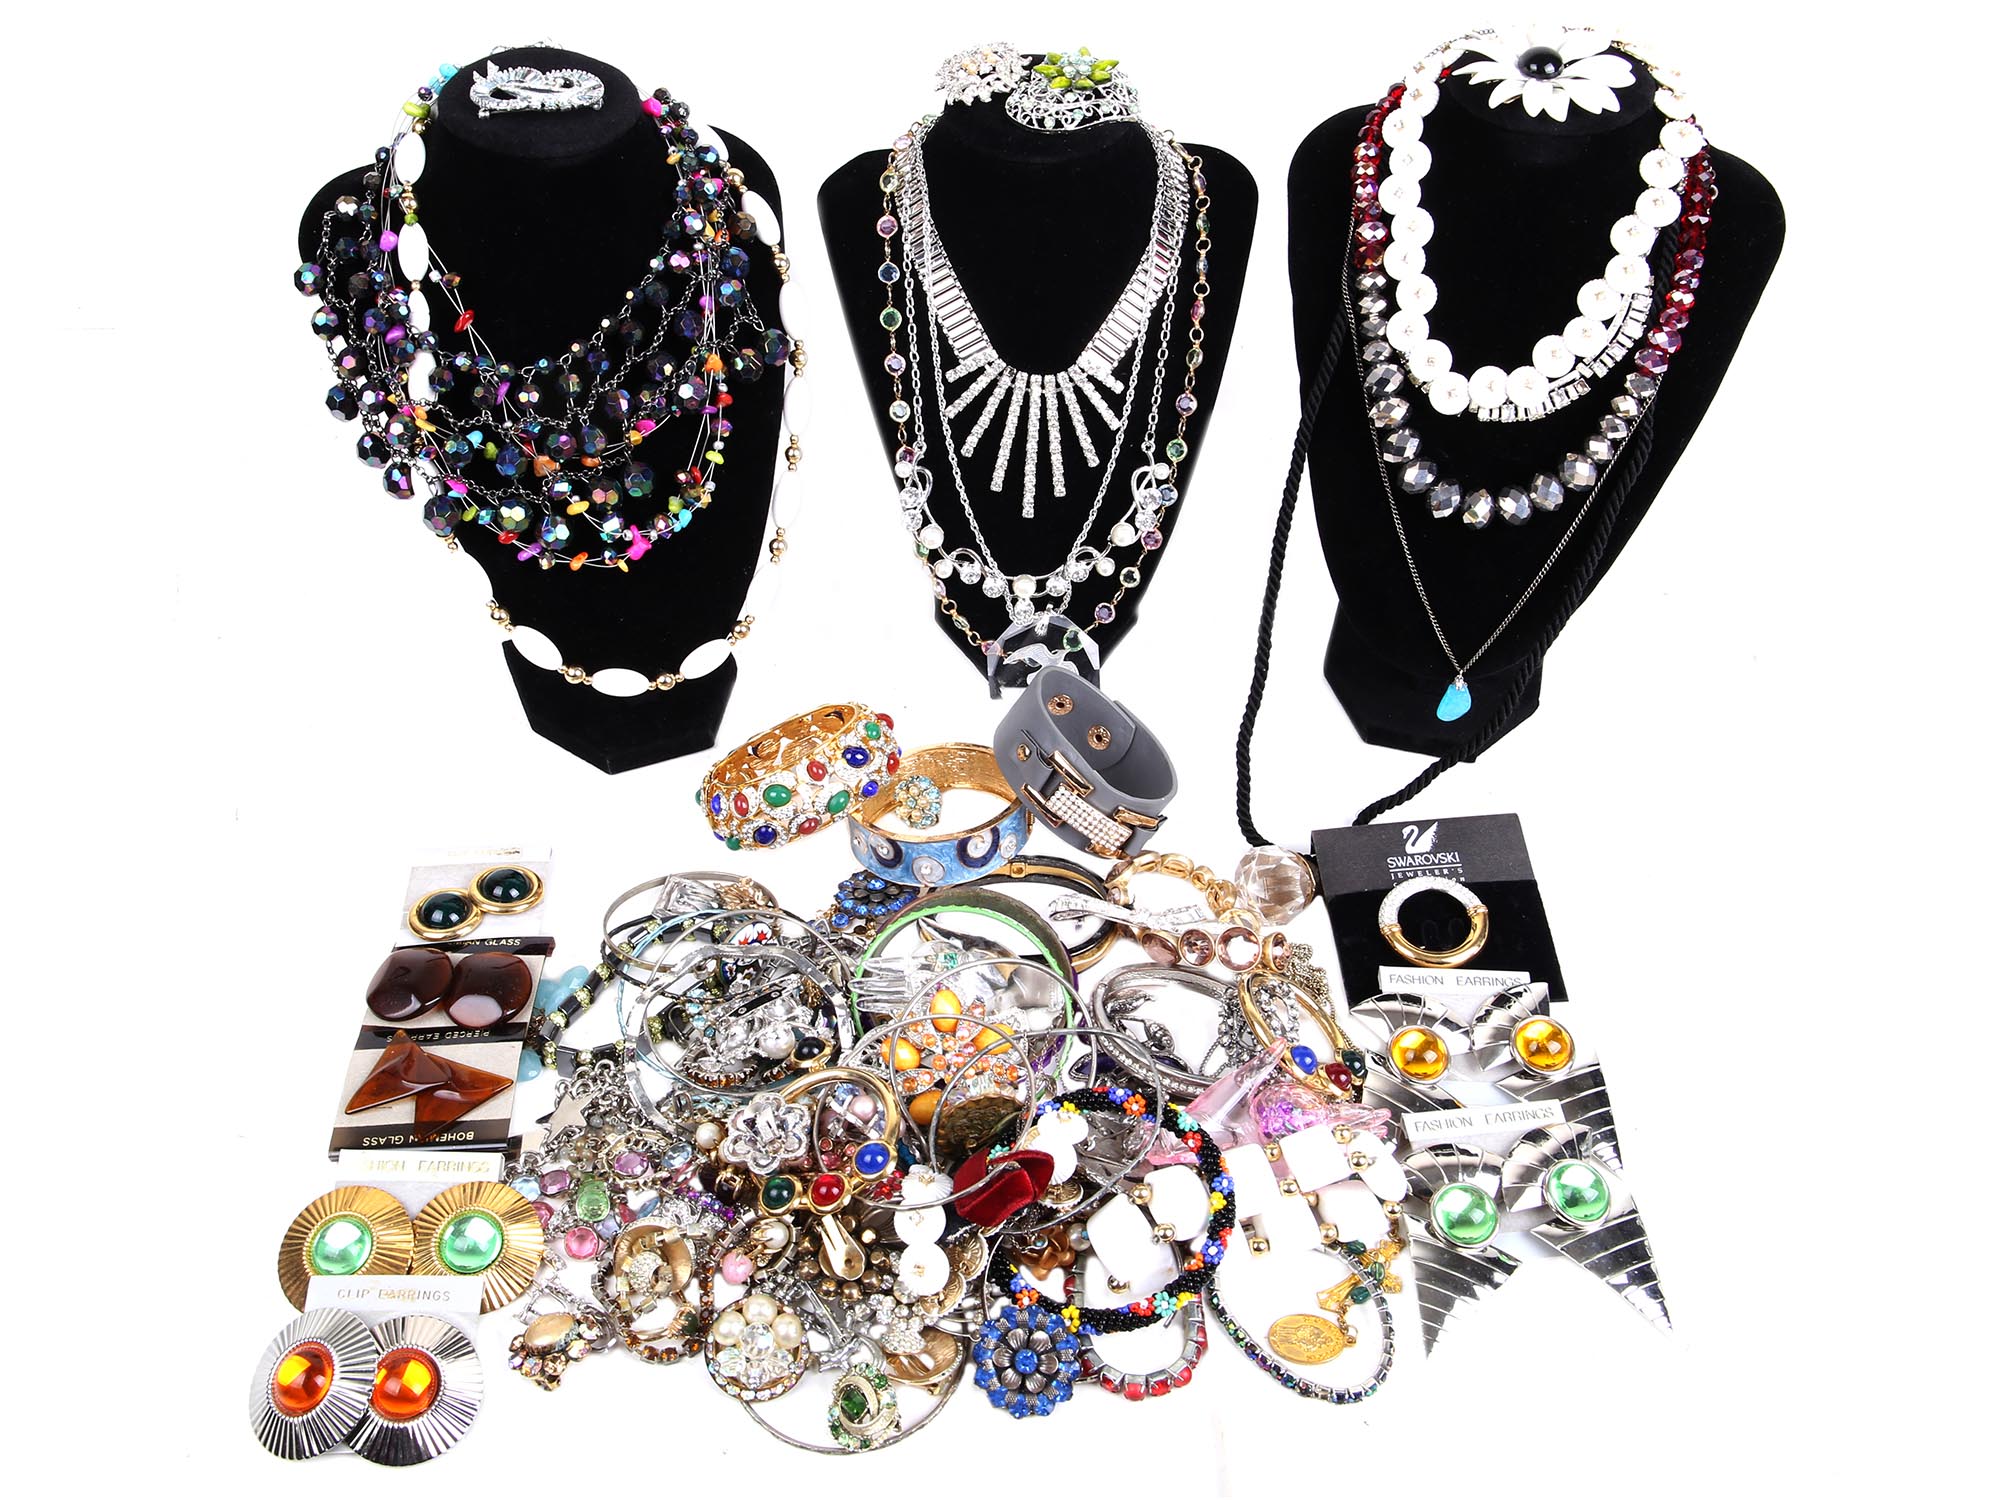 A LARGE COLLECTION OF COLORFUL COSTUME JEWELRY PIC-0